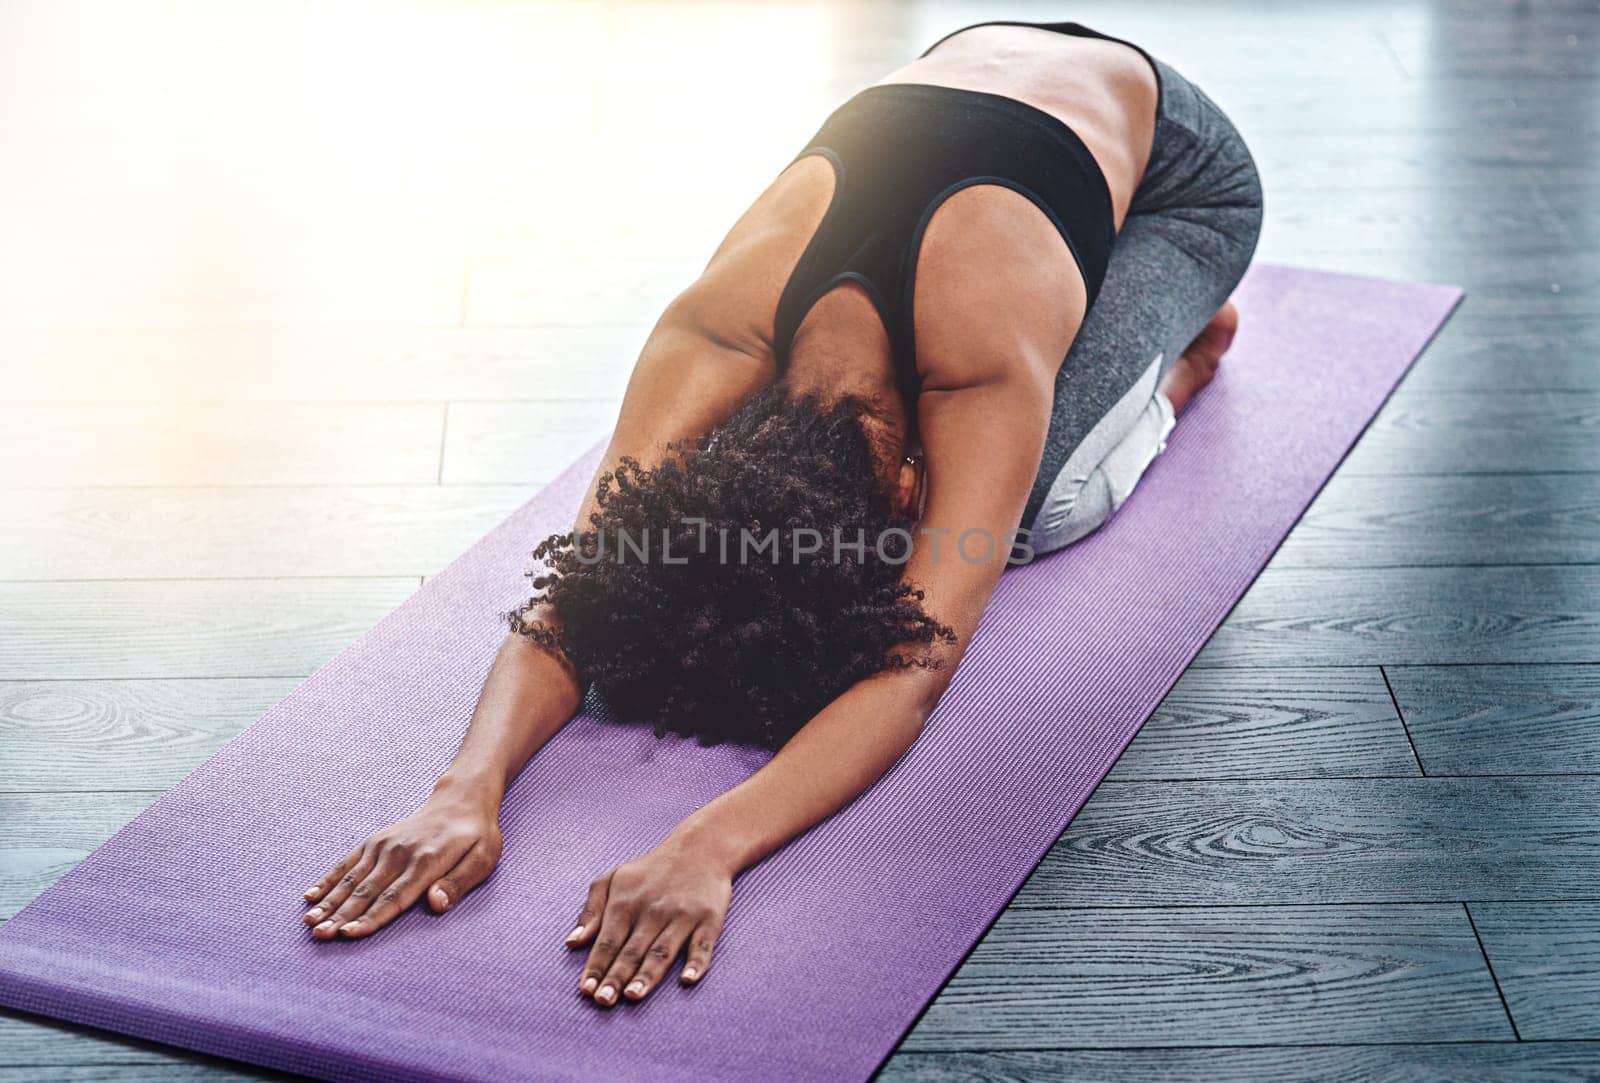 Yoga, workout and wellness with a woman in studio on an exercise mat for inner peace or to relax. Health, fitness and zen with a female athlete or yogi in the childs pose for balance or mindfulness by YuriArcurs